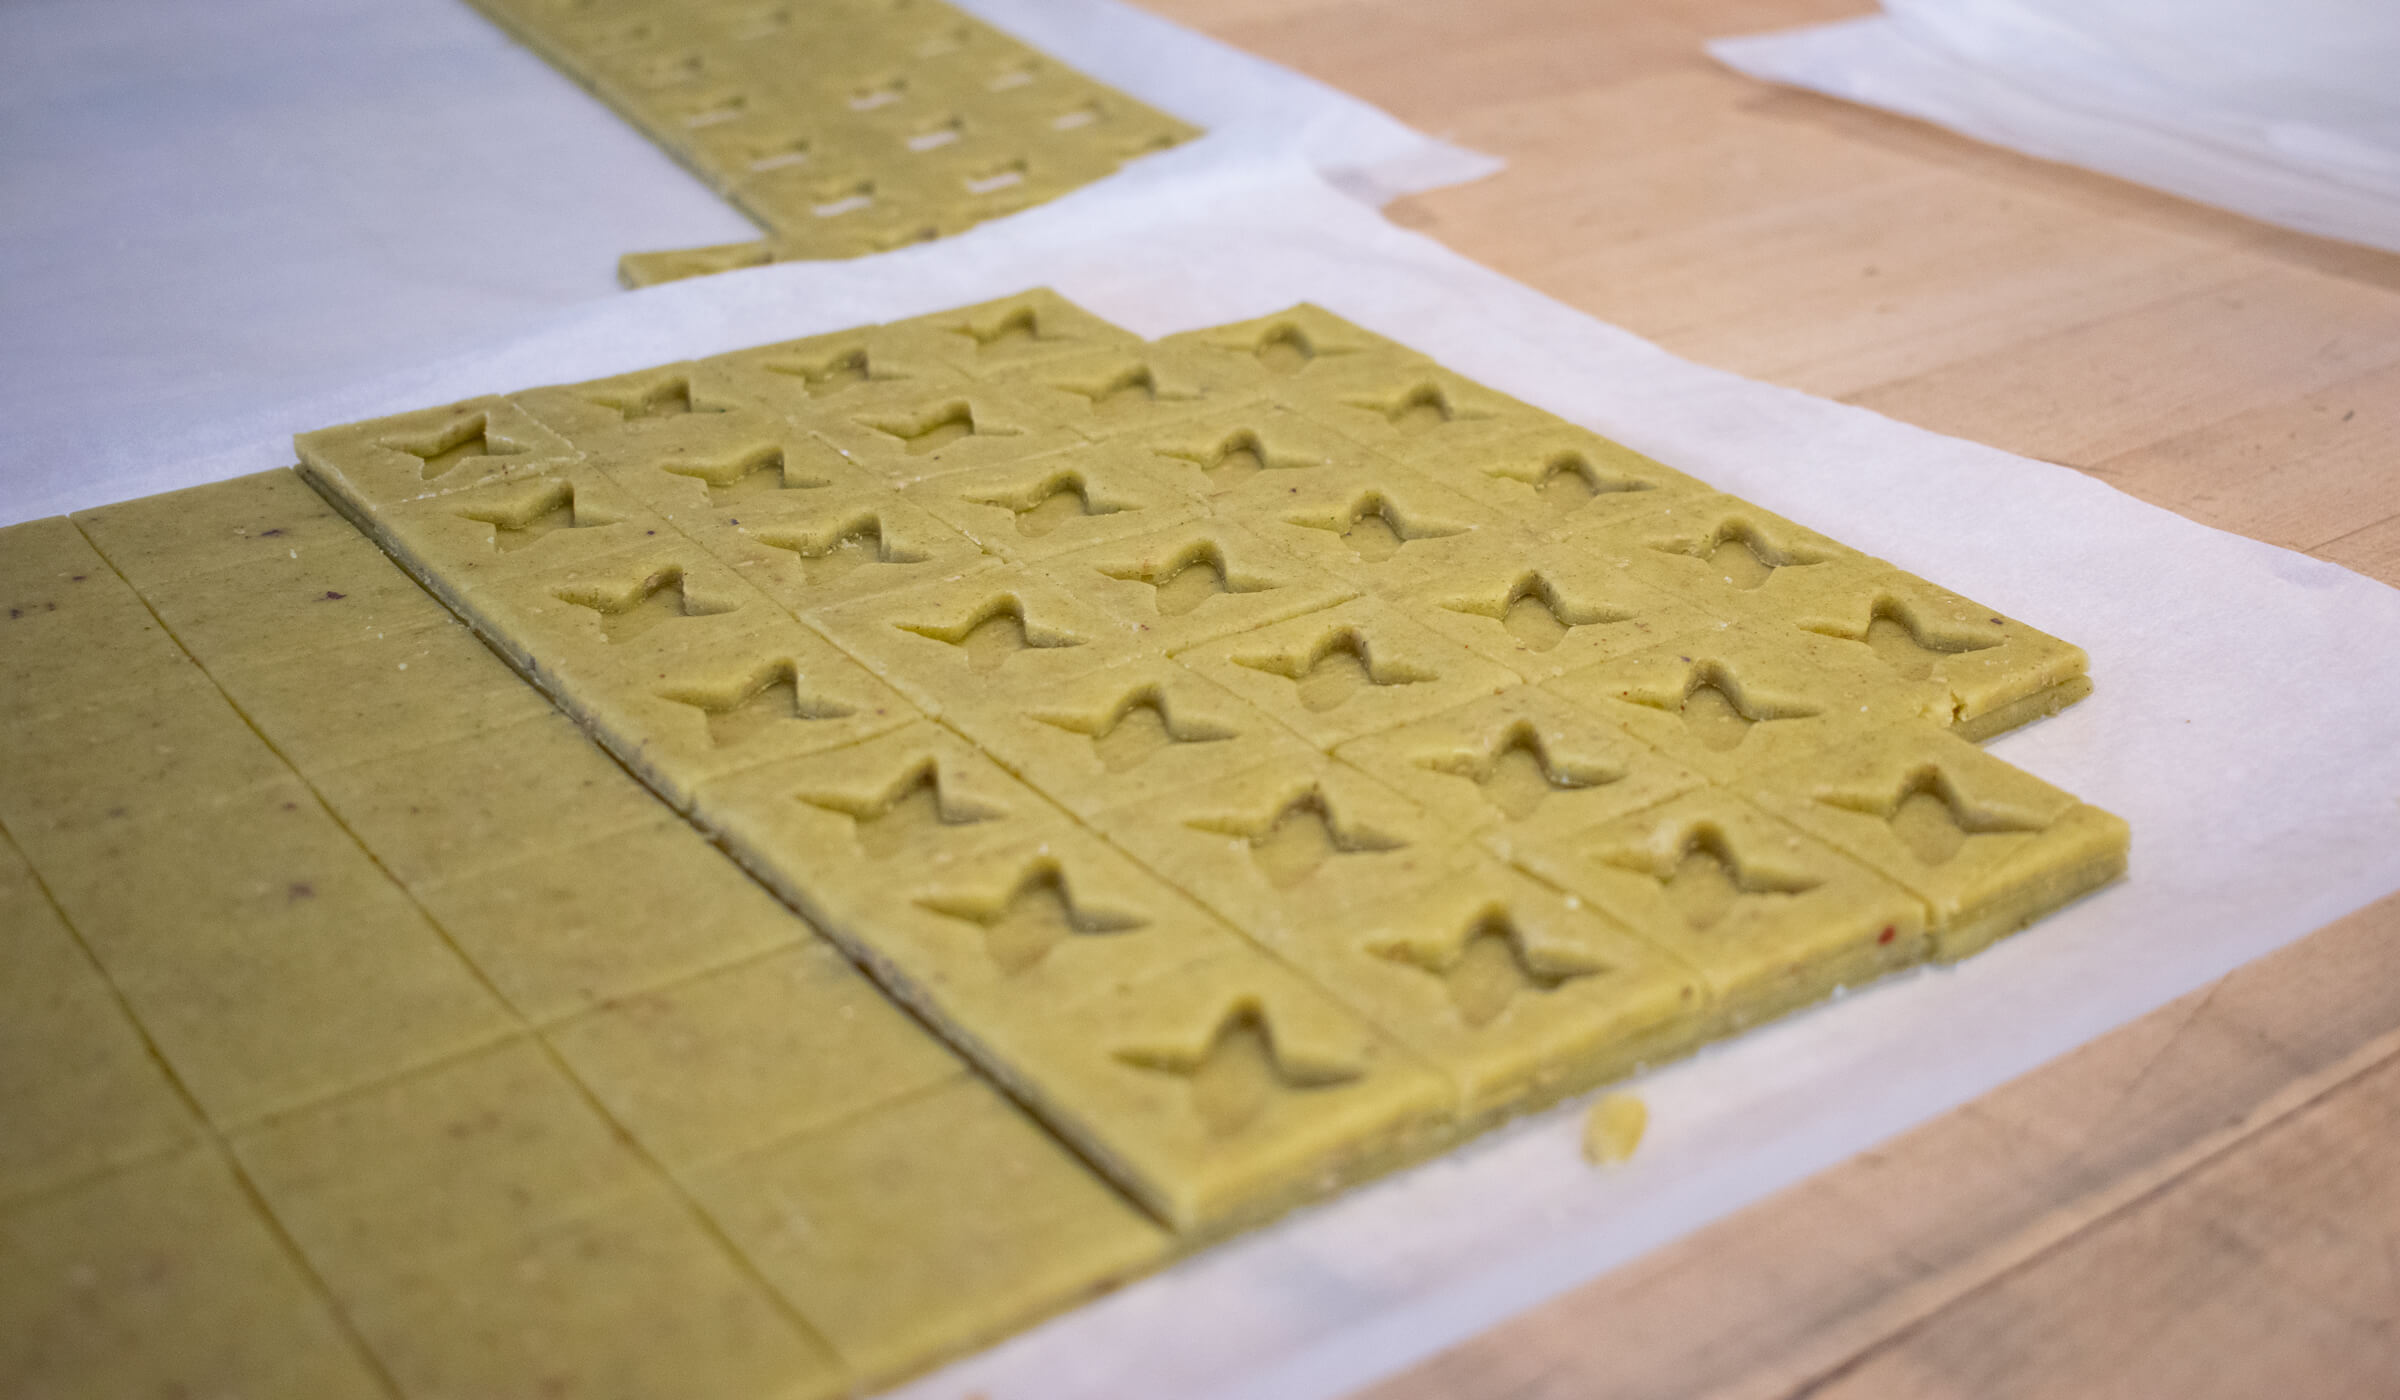 Cookies being made at La Boite in New York City